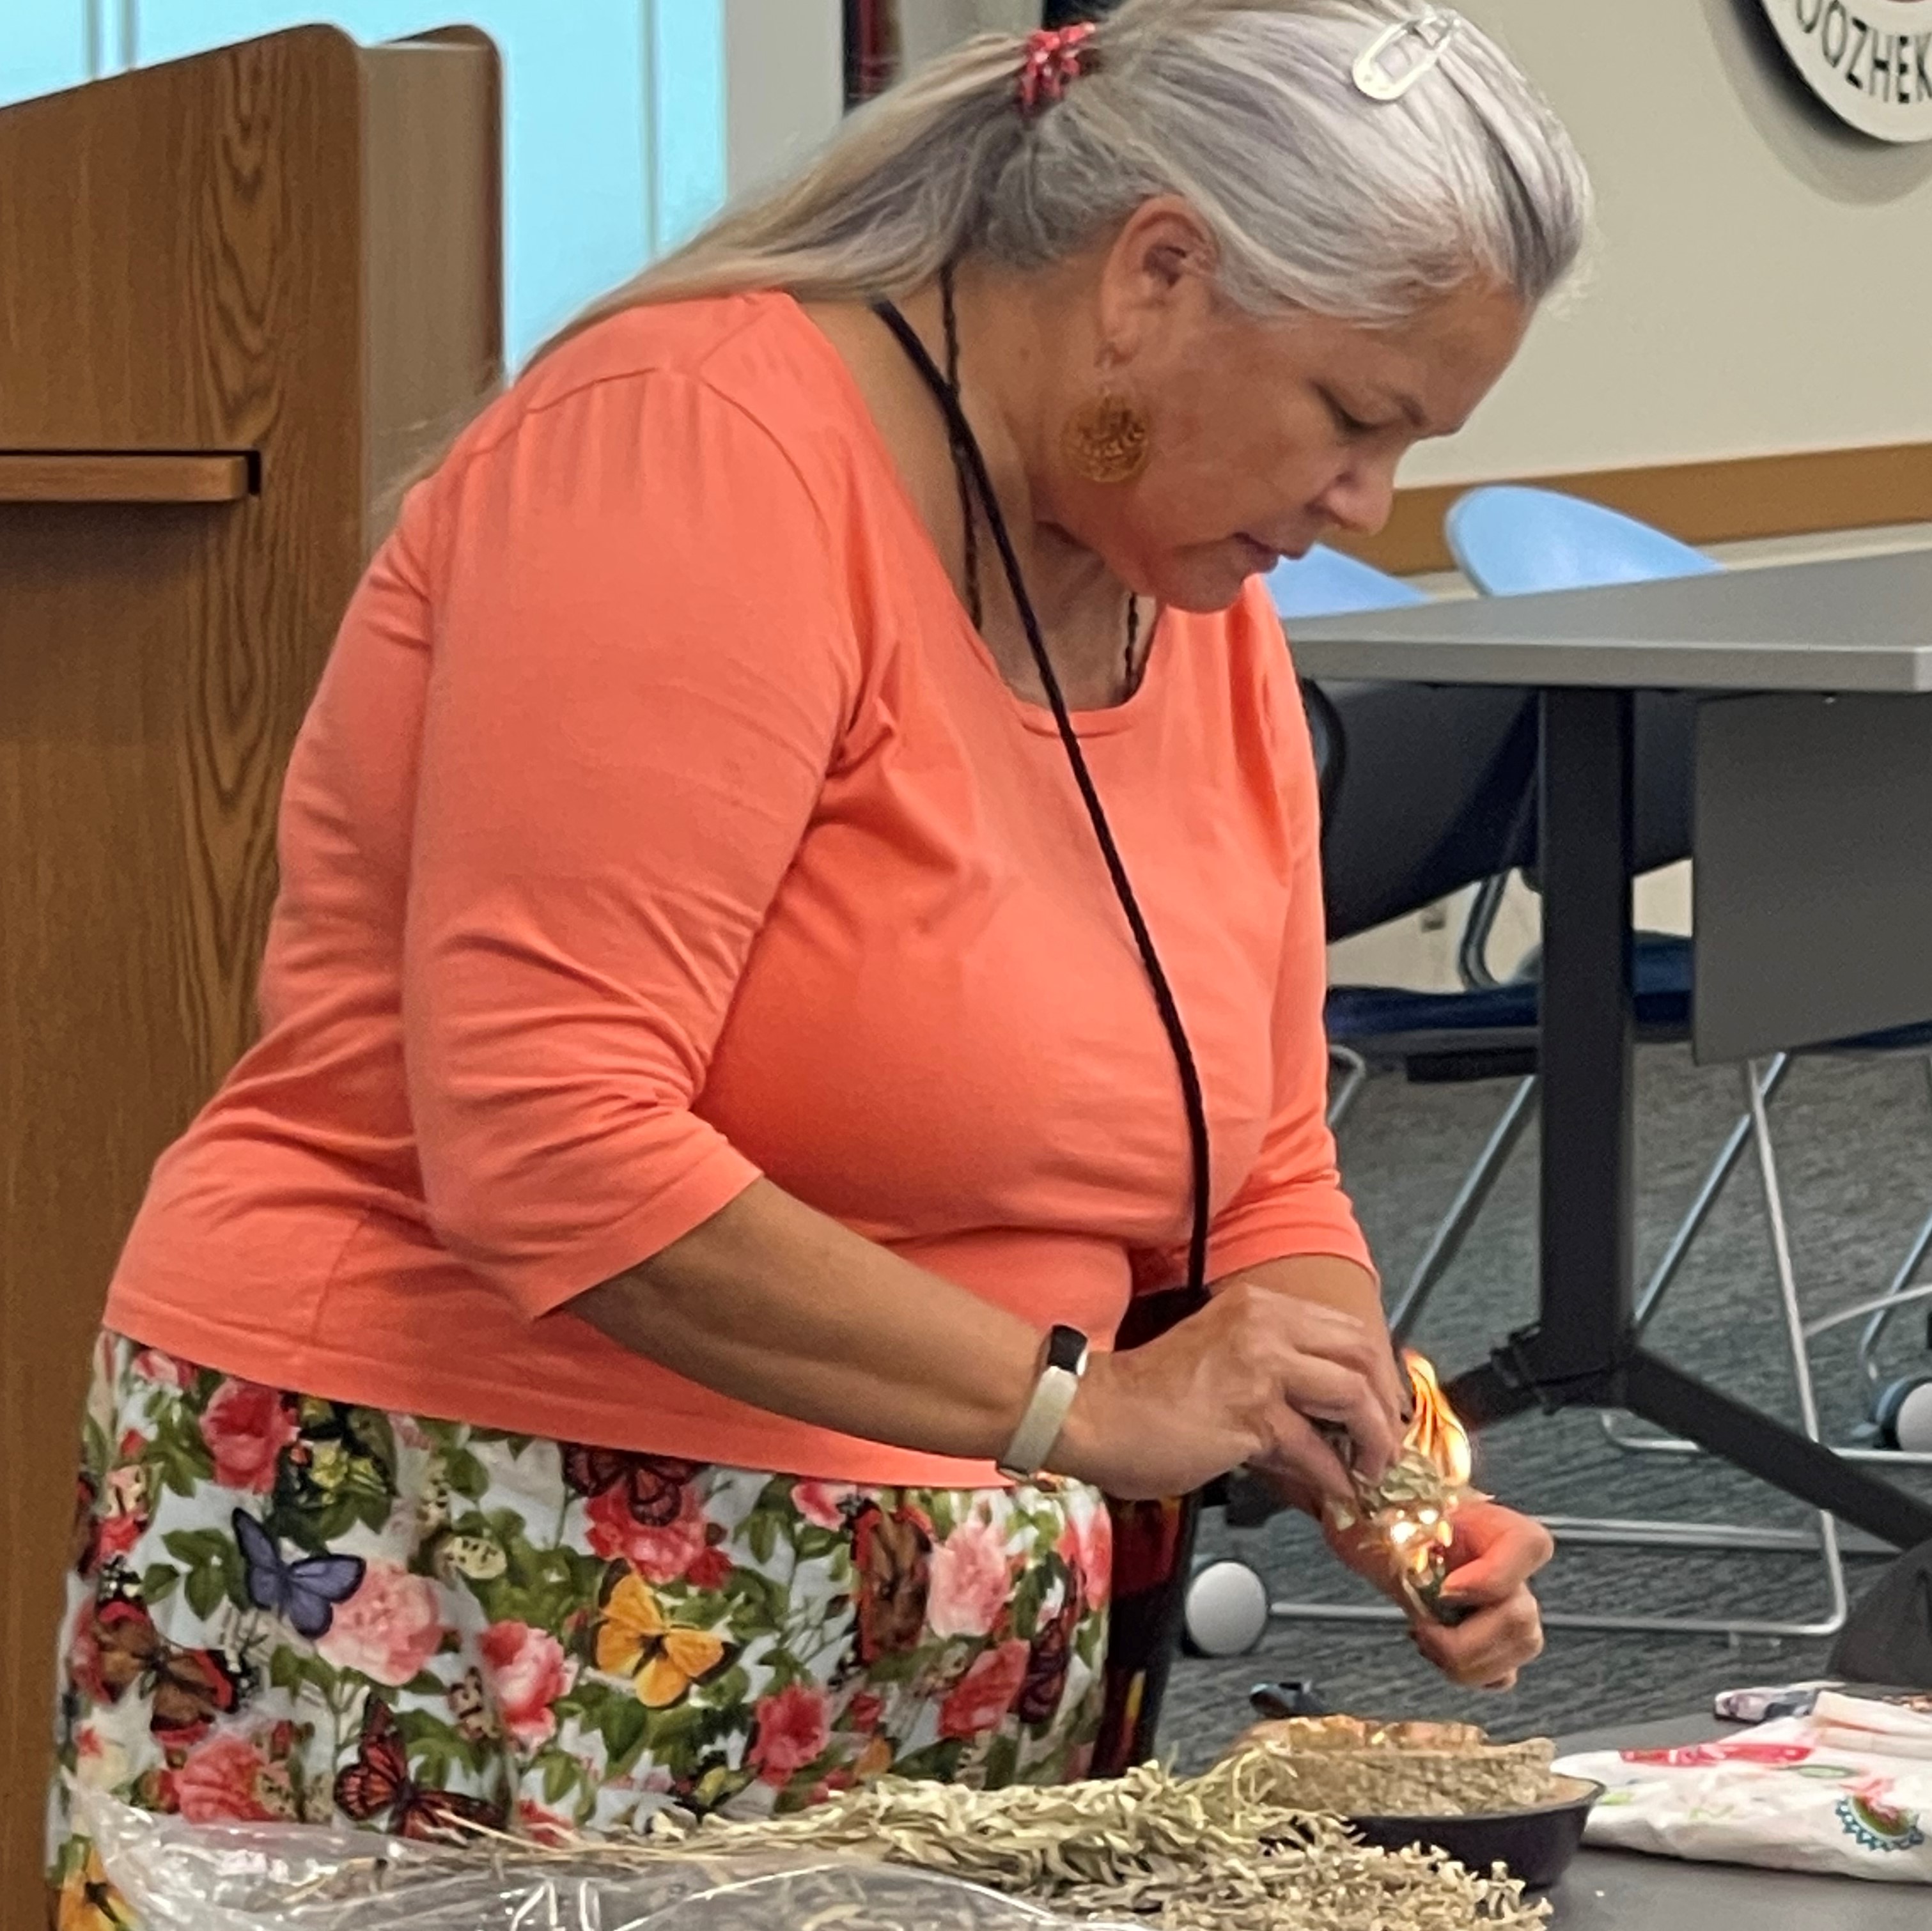  Michele Wellman-Teeple, Anishinaabemowin Pane Immersion Program faculty and director at Bay Mills Community College, performs smudge/prayer in the Anishnaabemowin language.